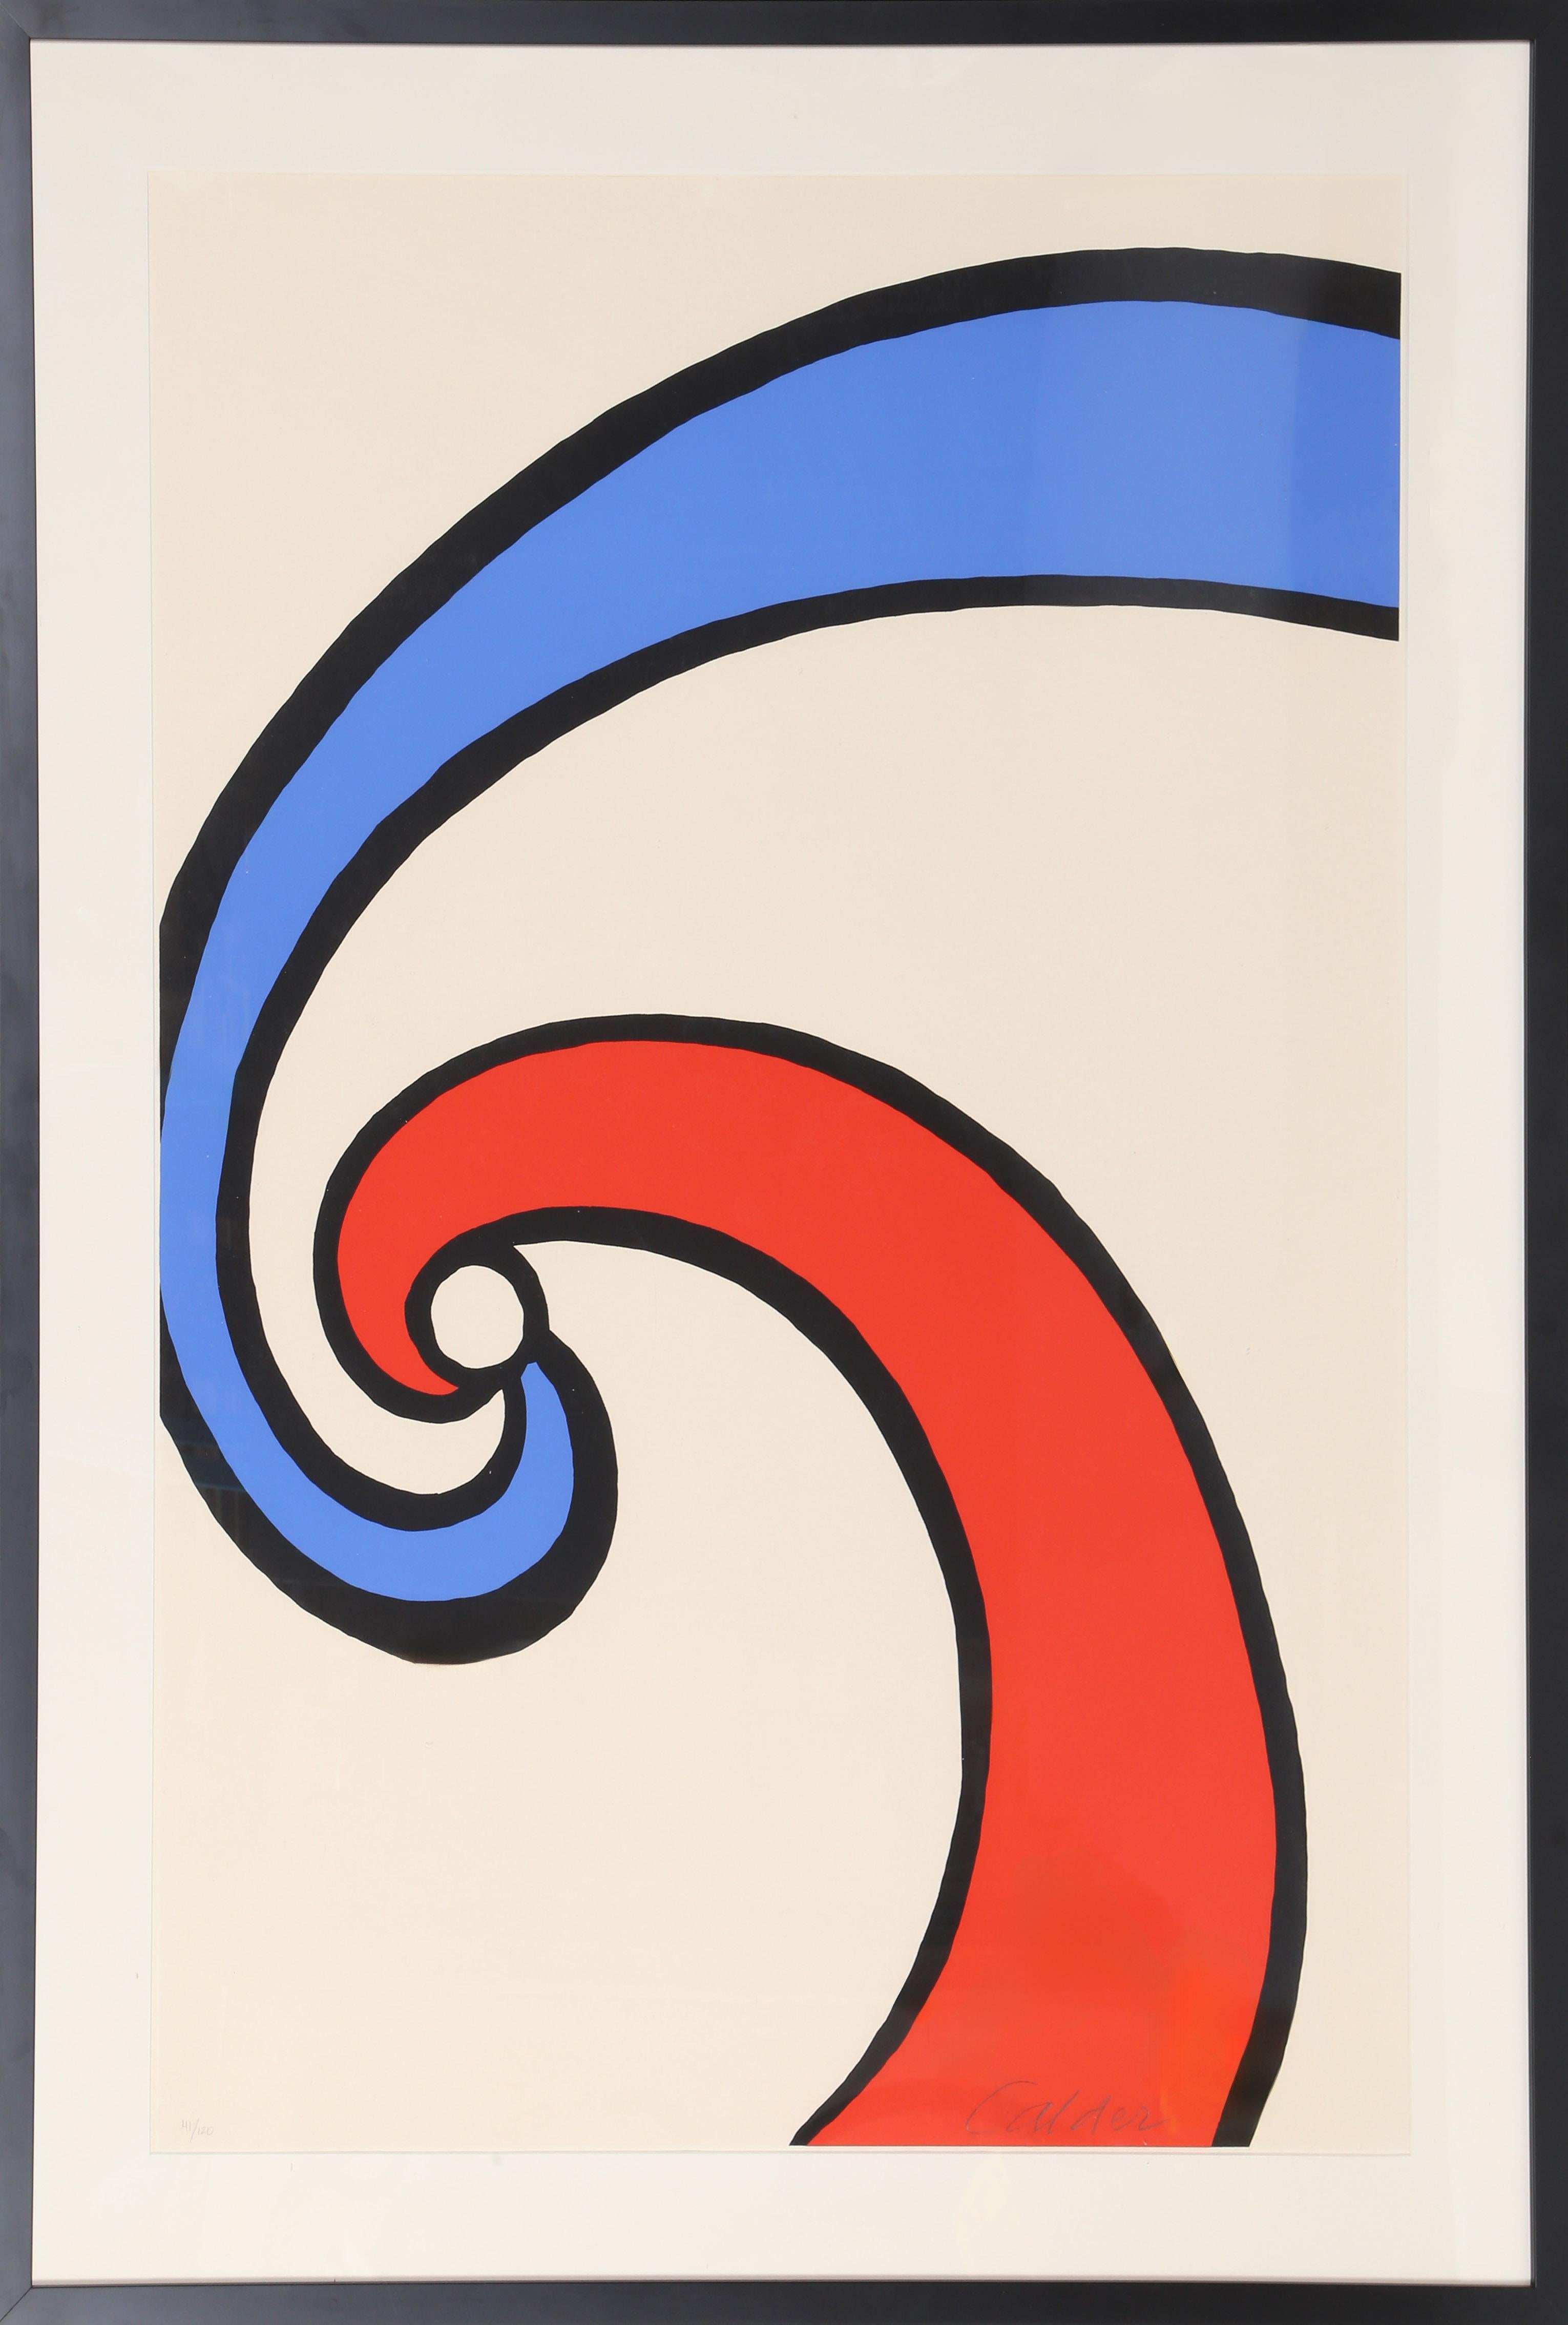 A two-toned spiral composition by American Modern artist Alexander Calder. This print is in Calder’s characteristic style with thick black lines defining flat expanses of color. This framed piece is signed and numbered in pencil by the artist.

Red